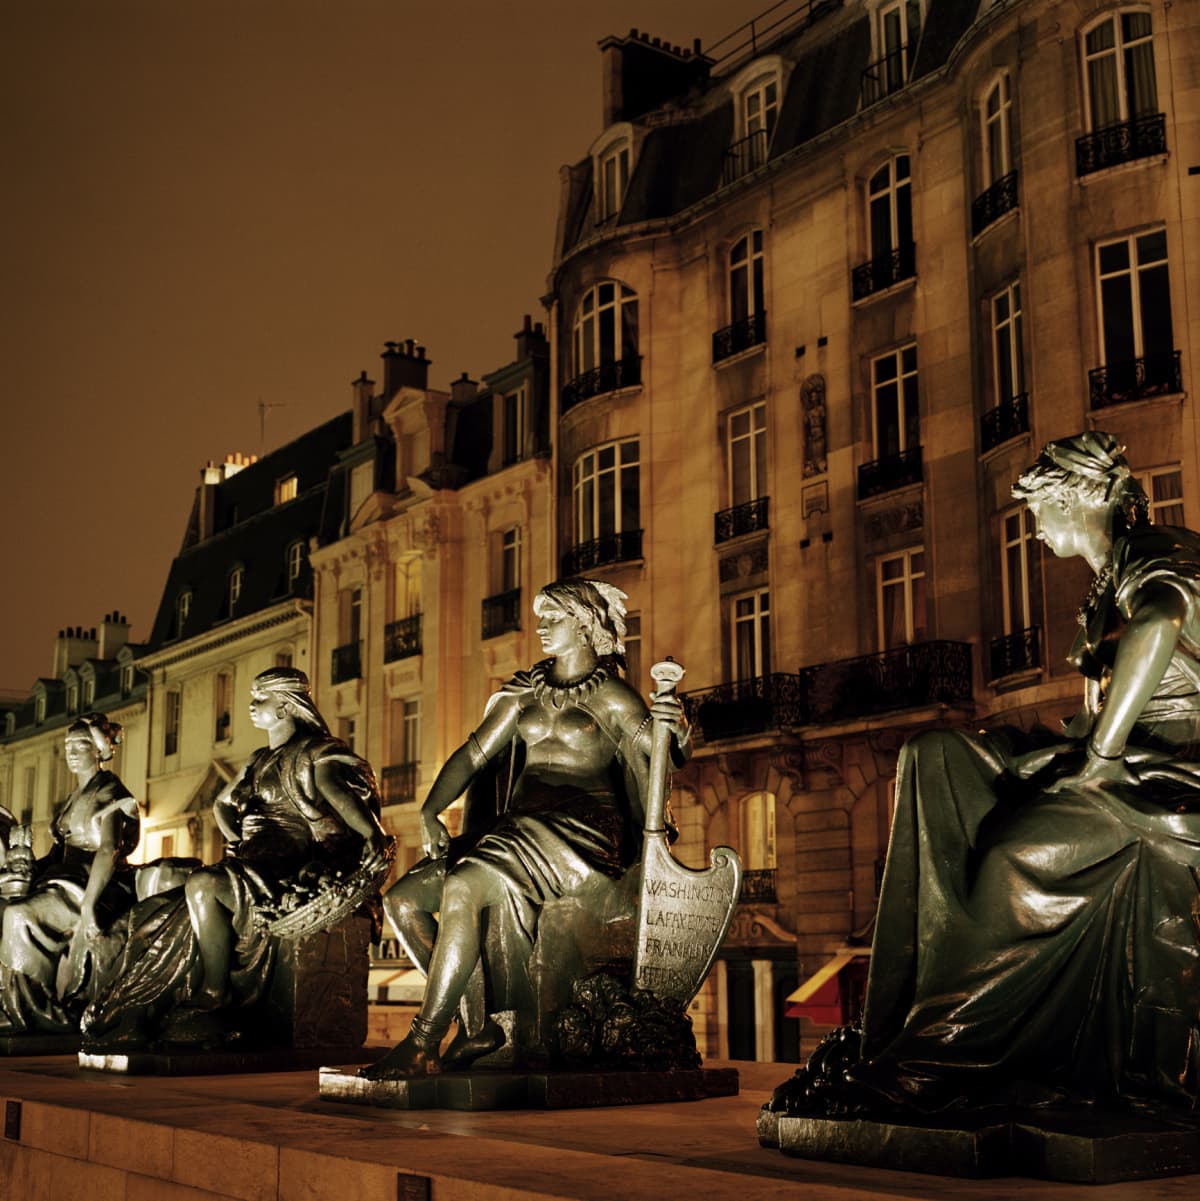 Exterior view at night of the Musee d'Orsay and statues in Paris